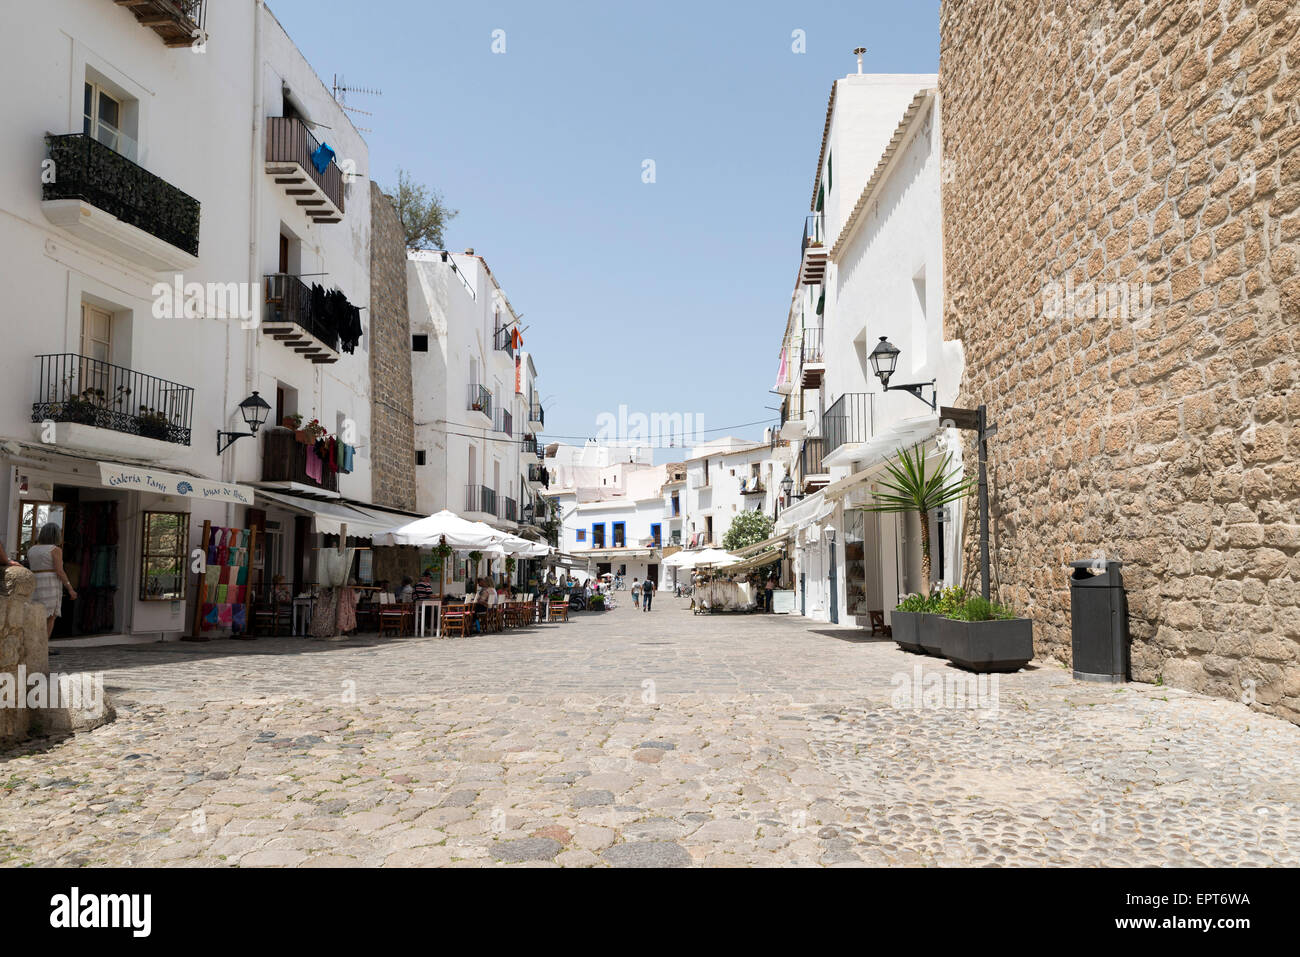 IBIZA, SPAIN - MAY 13, 2015: Pedestrian street in Ibiza Town, Balearic Islands, Spain. With a population of 48,484, the city is Stock Photo